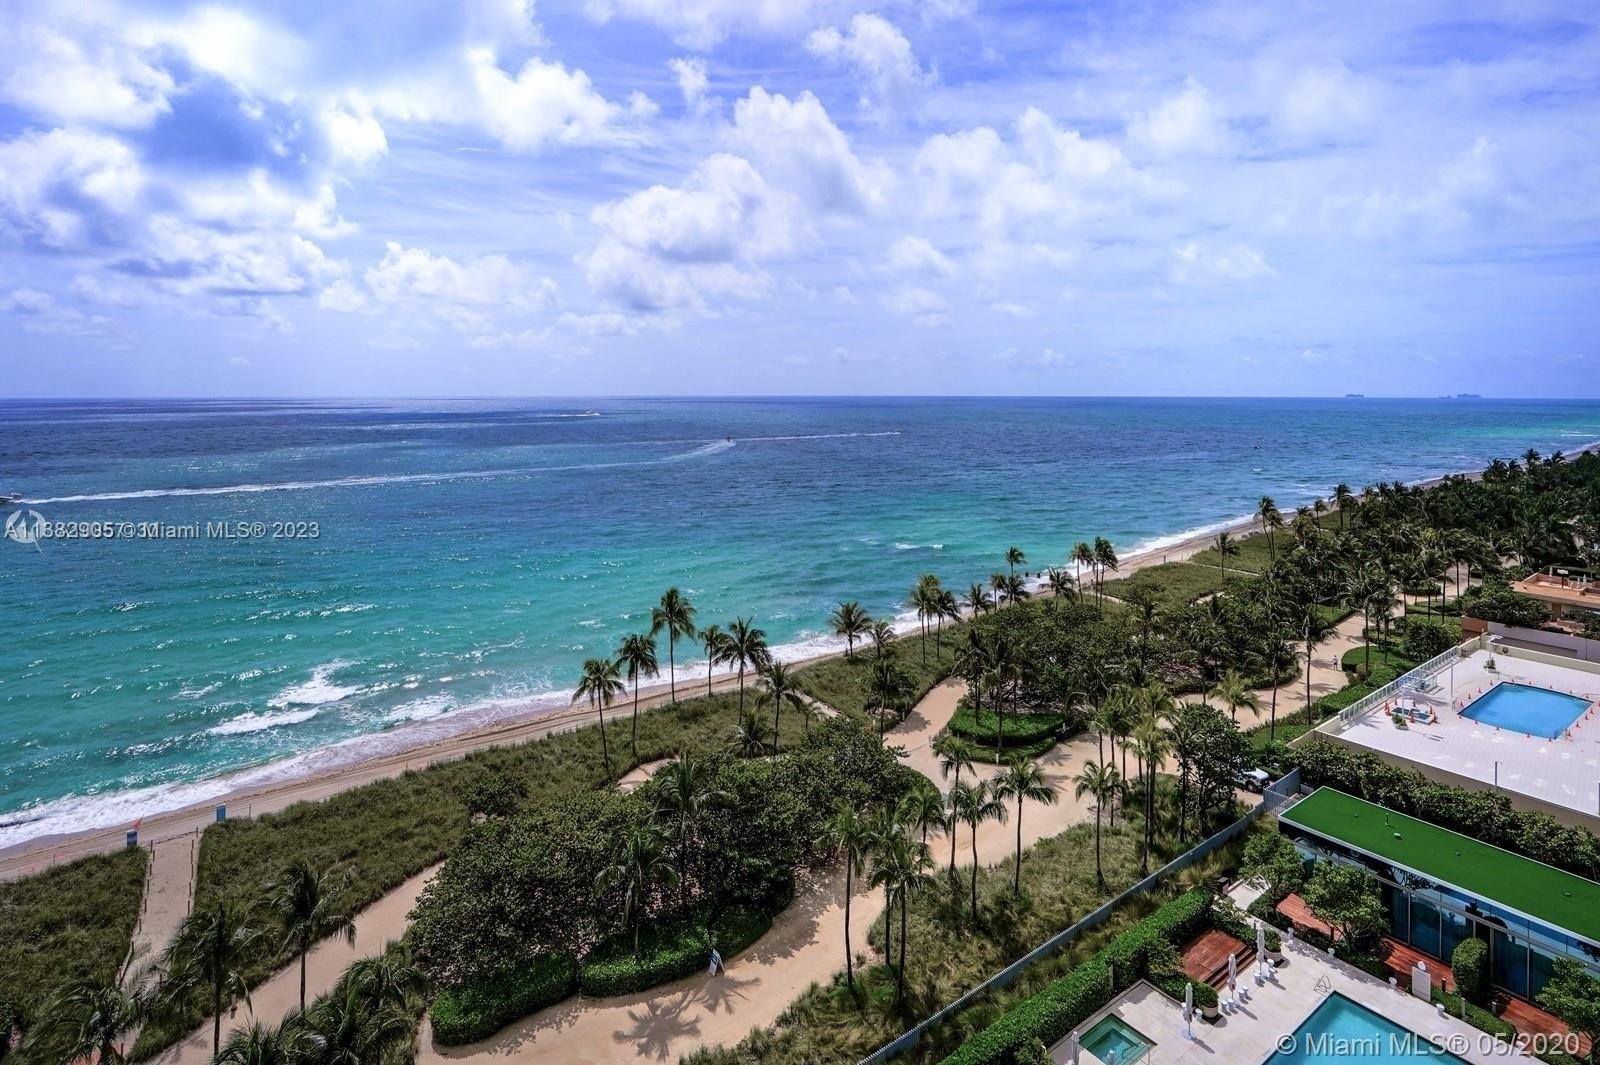 Property at 10203 Collins Ave, 1002 Bal Harbour, FL 33154